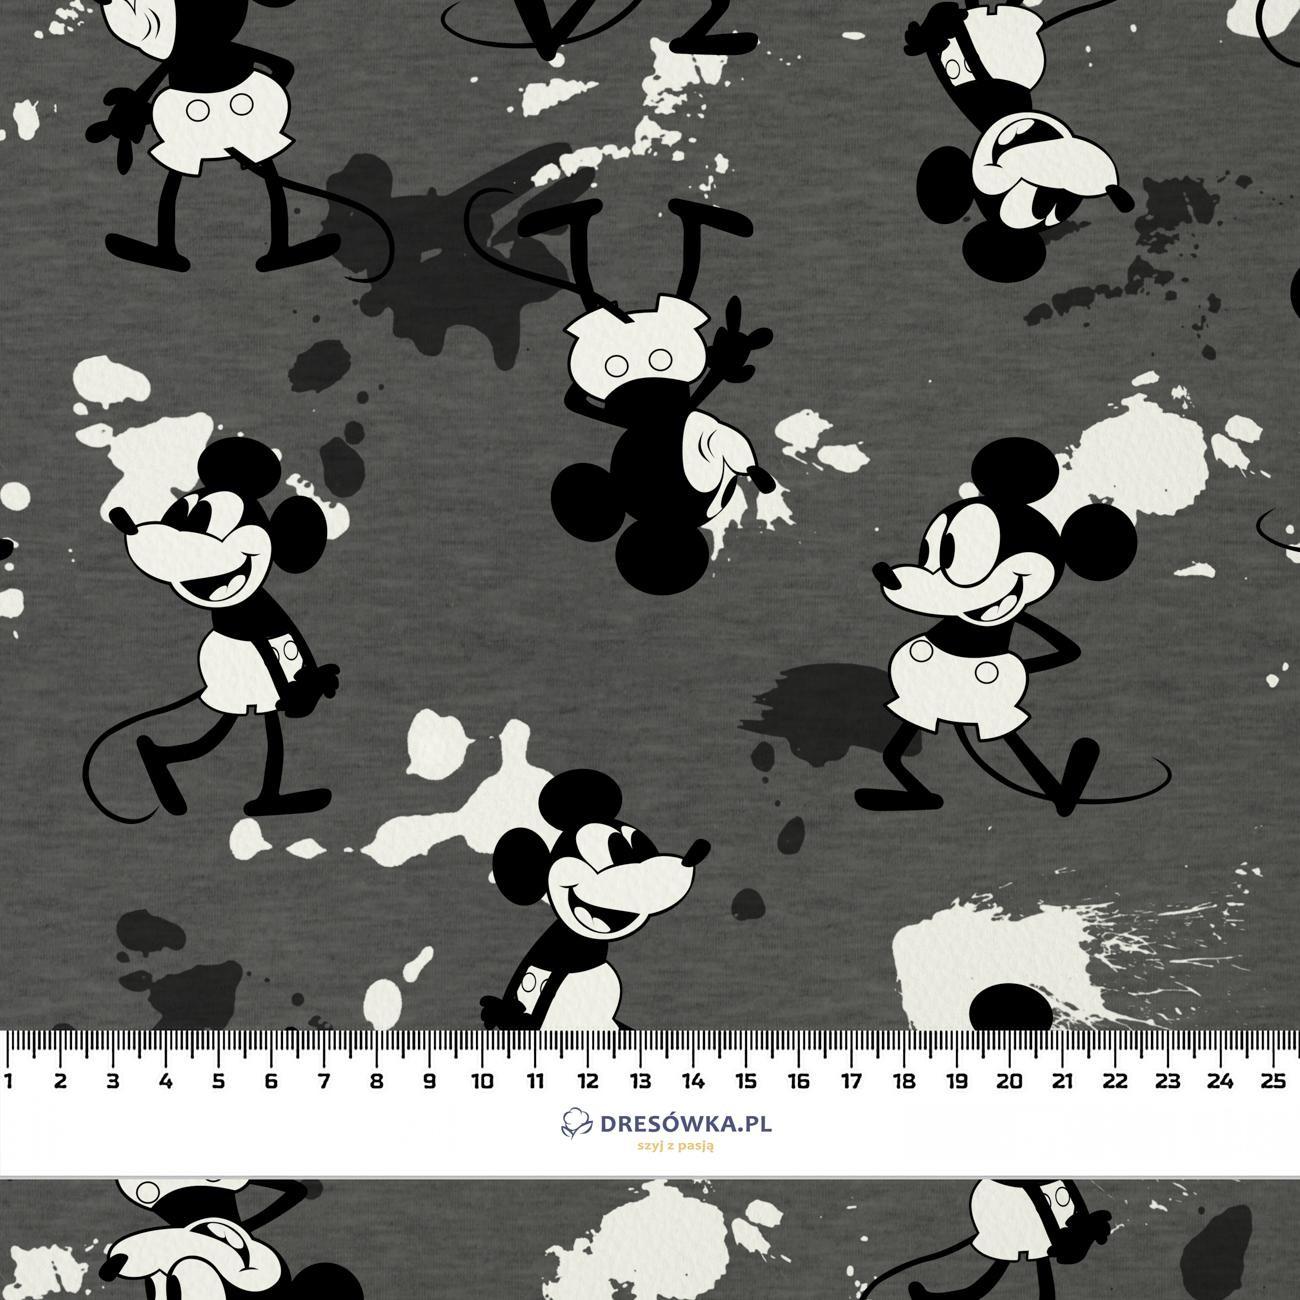 MOUSE PAT. 6 - quick-drying woven fabric